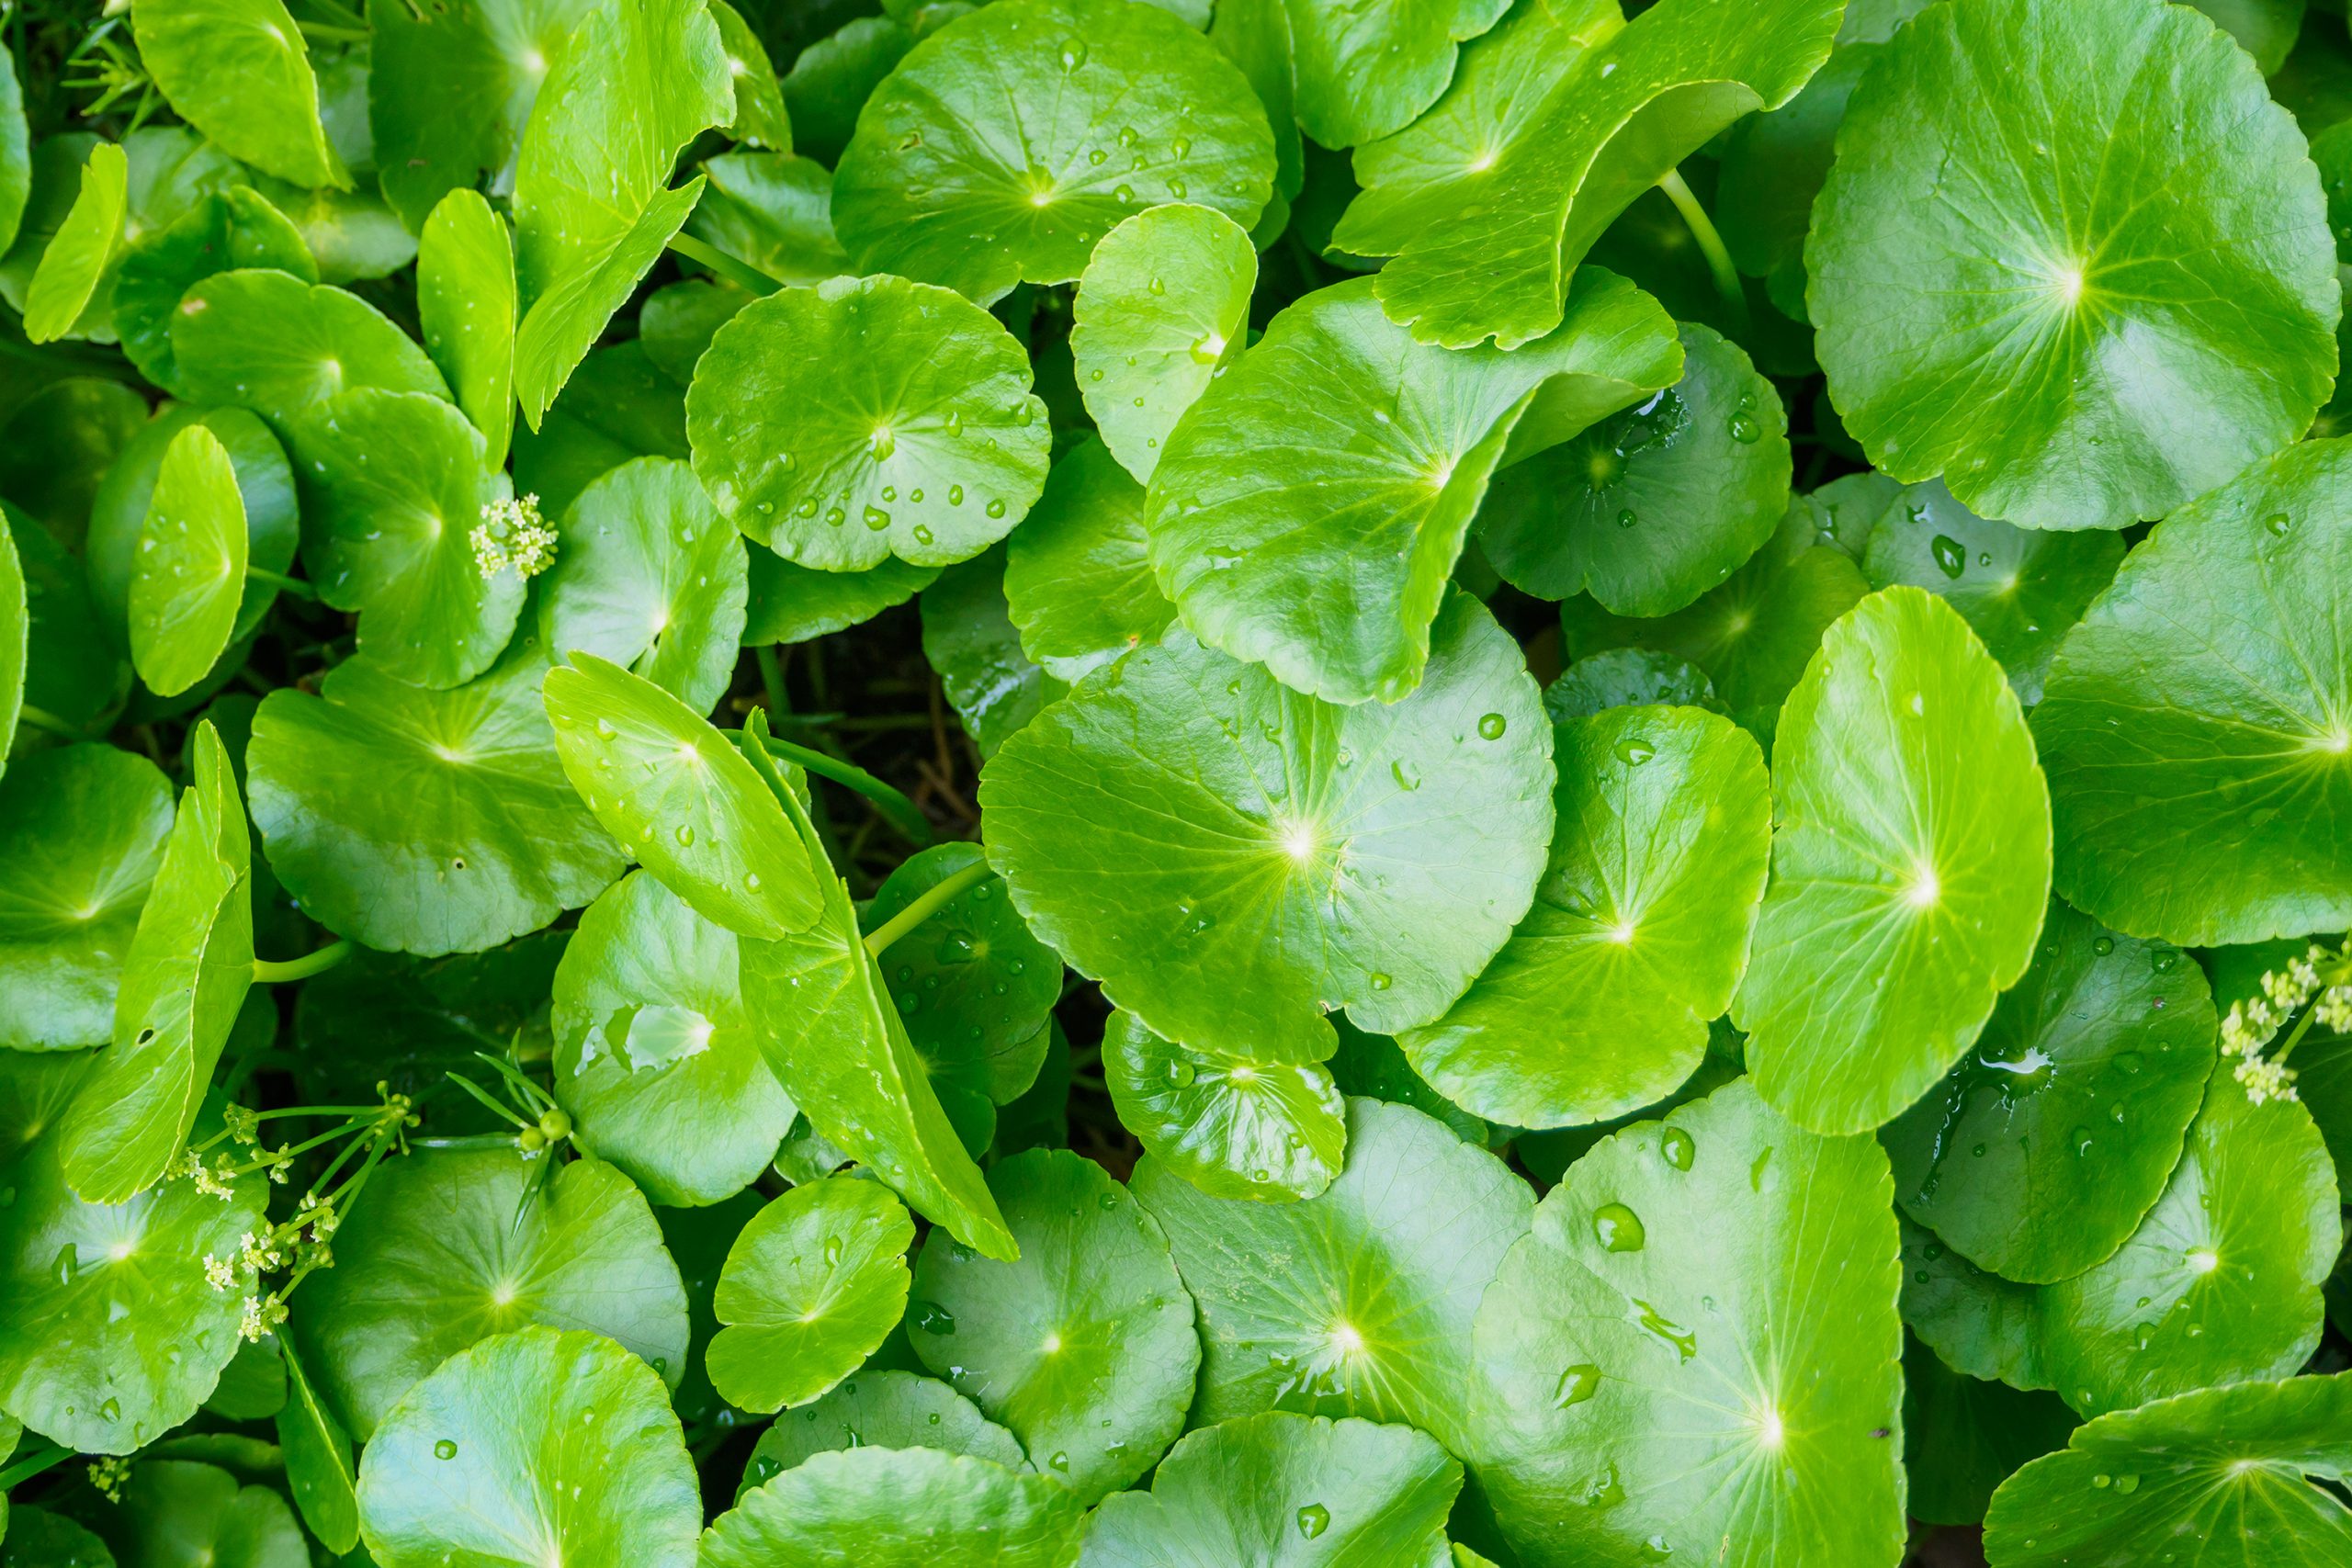 Gotu Kola For the Hair - What Are the Benefits According to Science